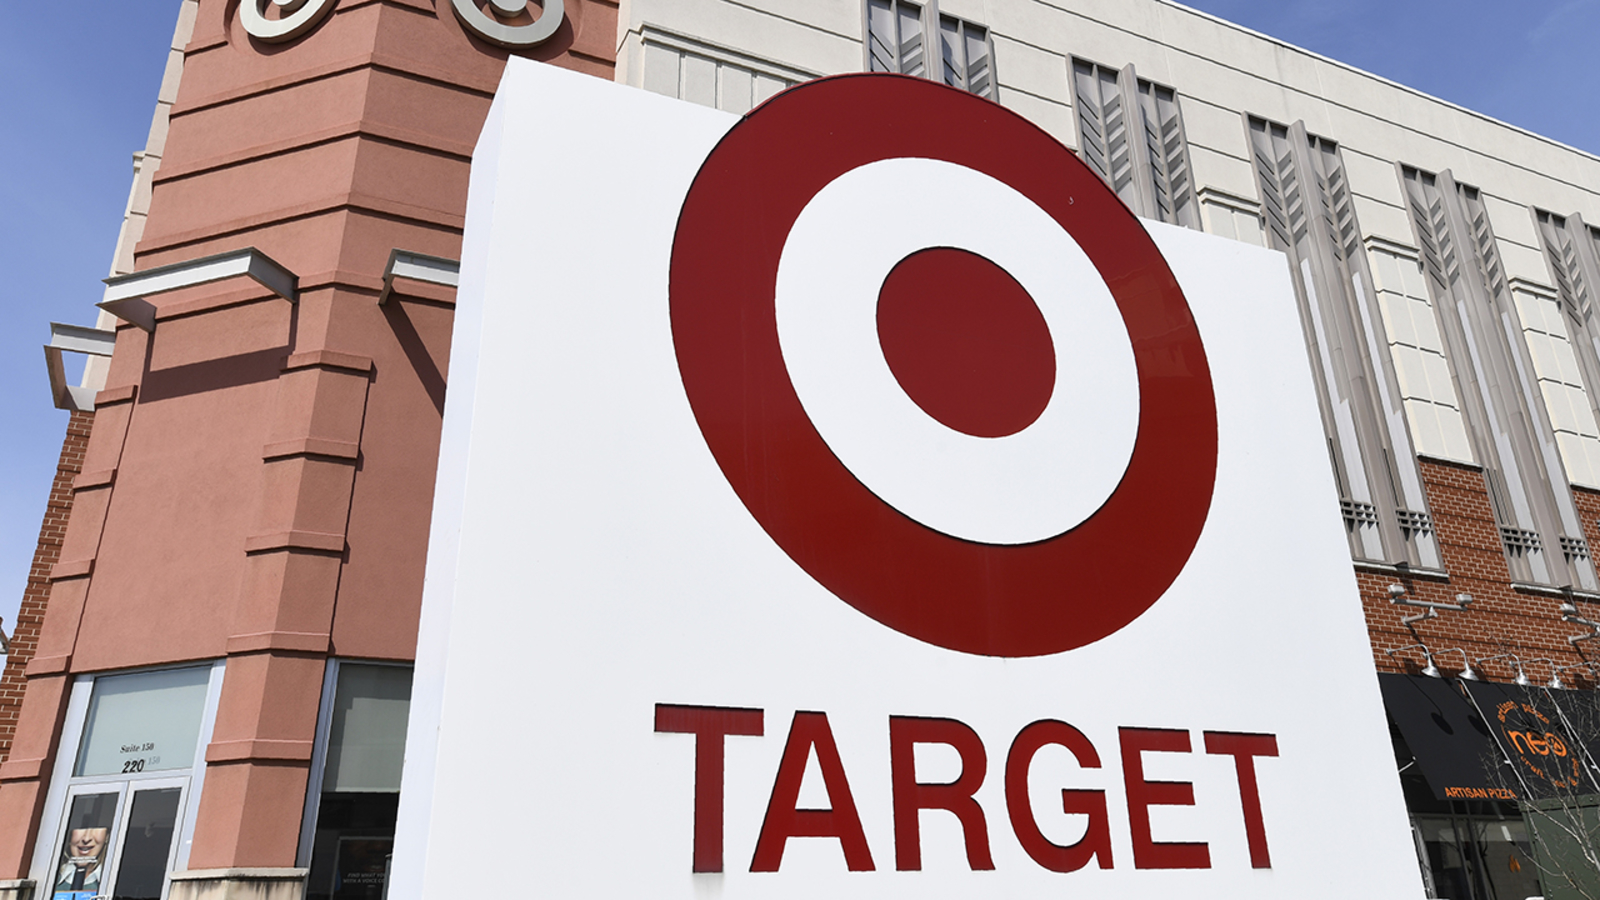 Target Thanksgiving hours Retailer closed on holiday moving forward